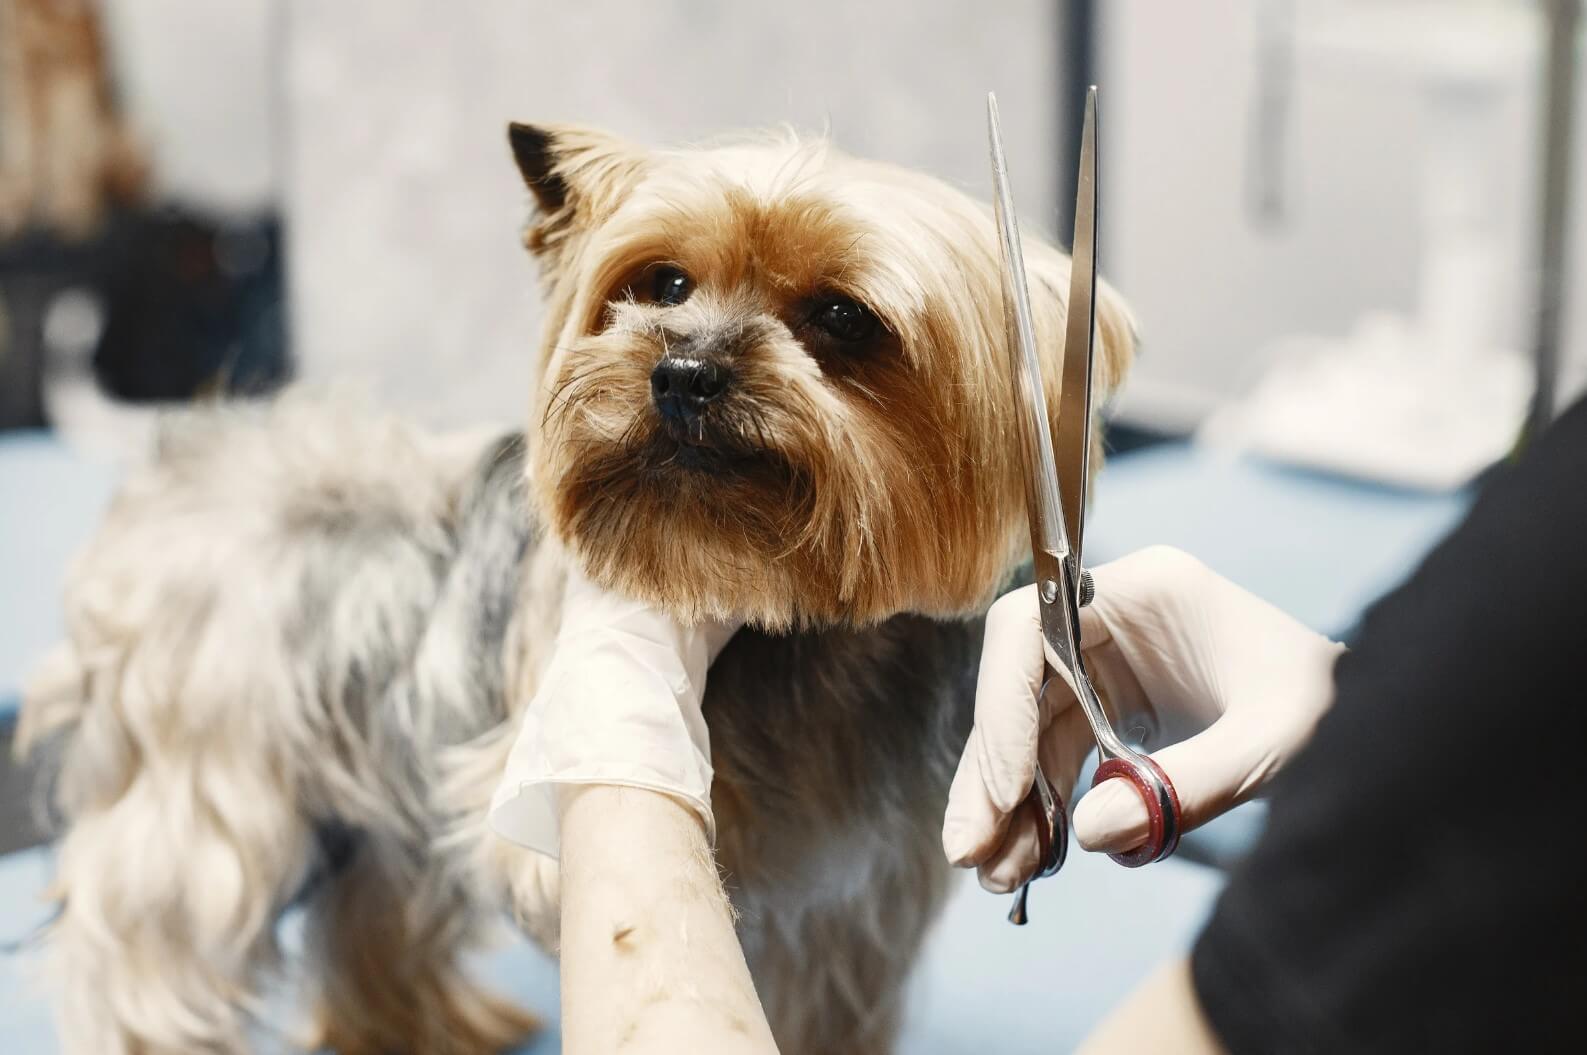 Pet Grooming Trends: Should You Take Your Dog to a Salon?